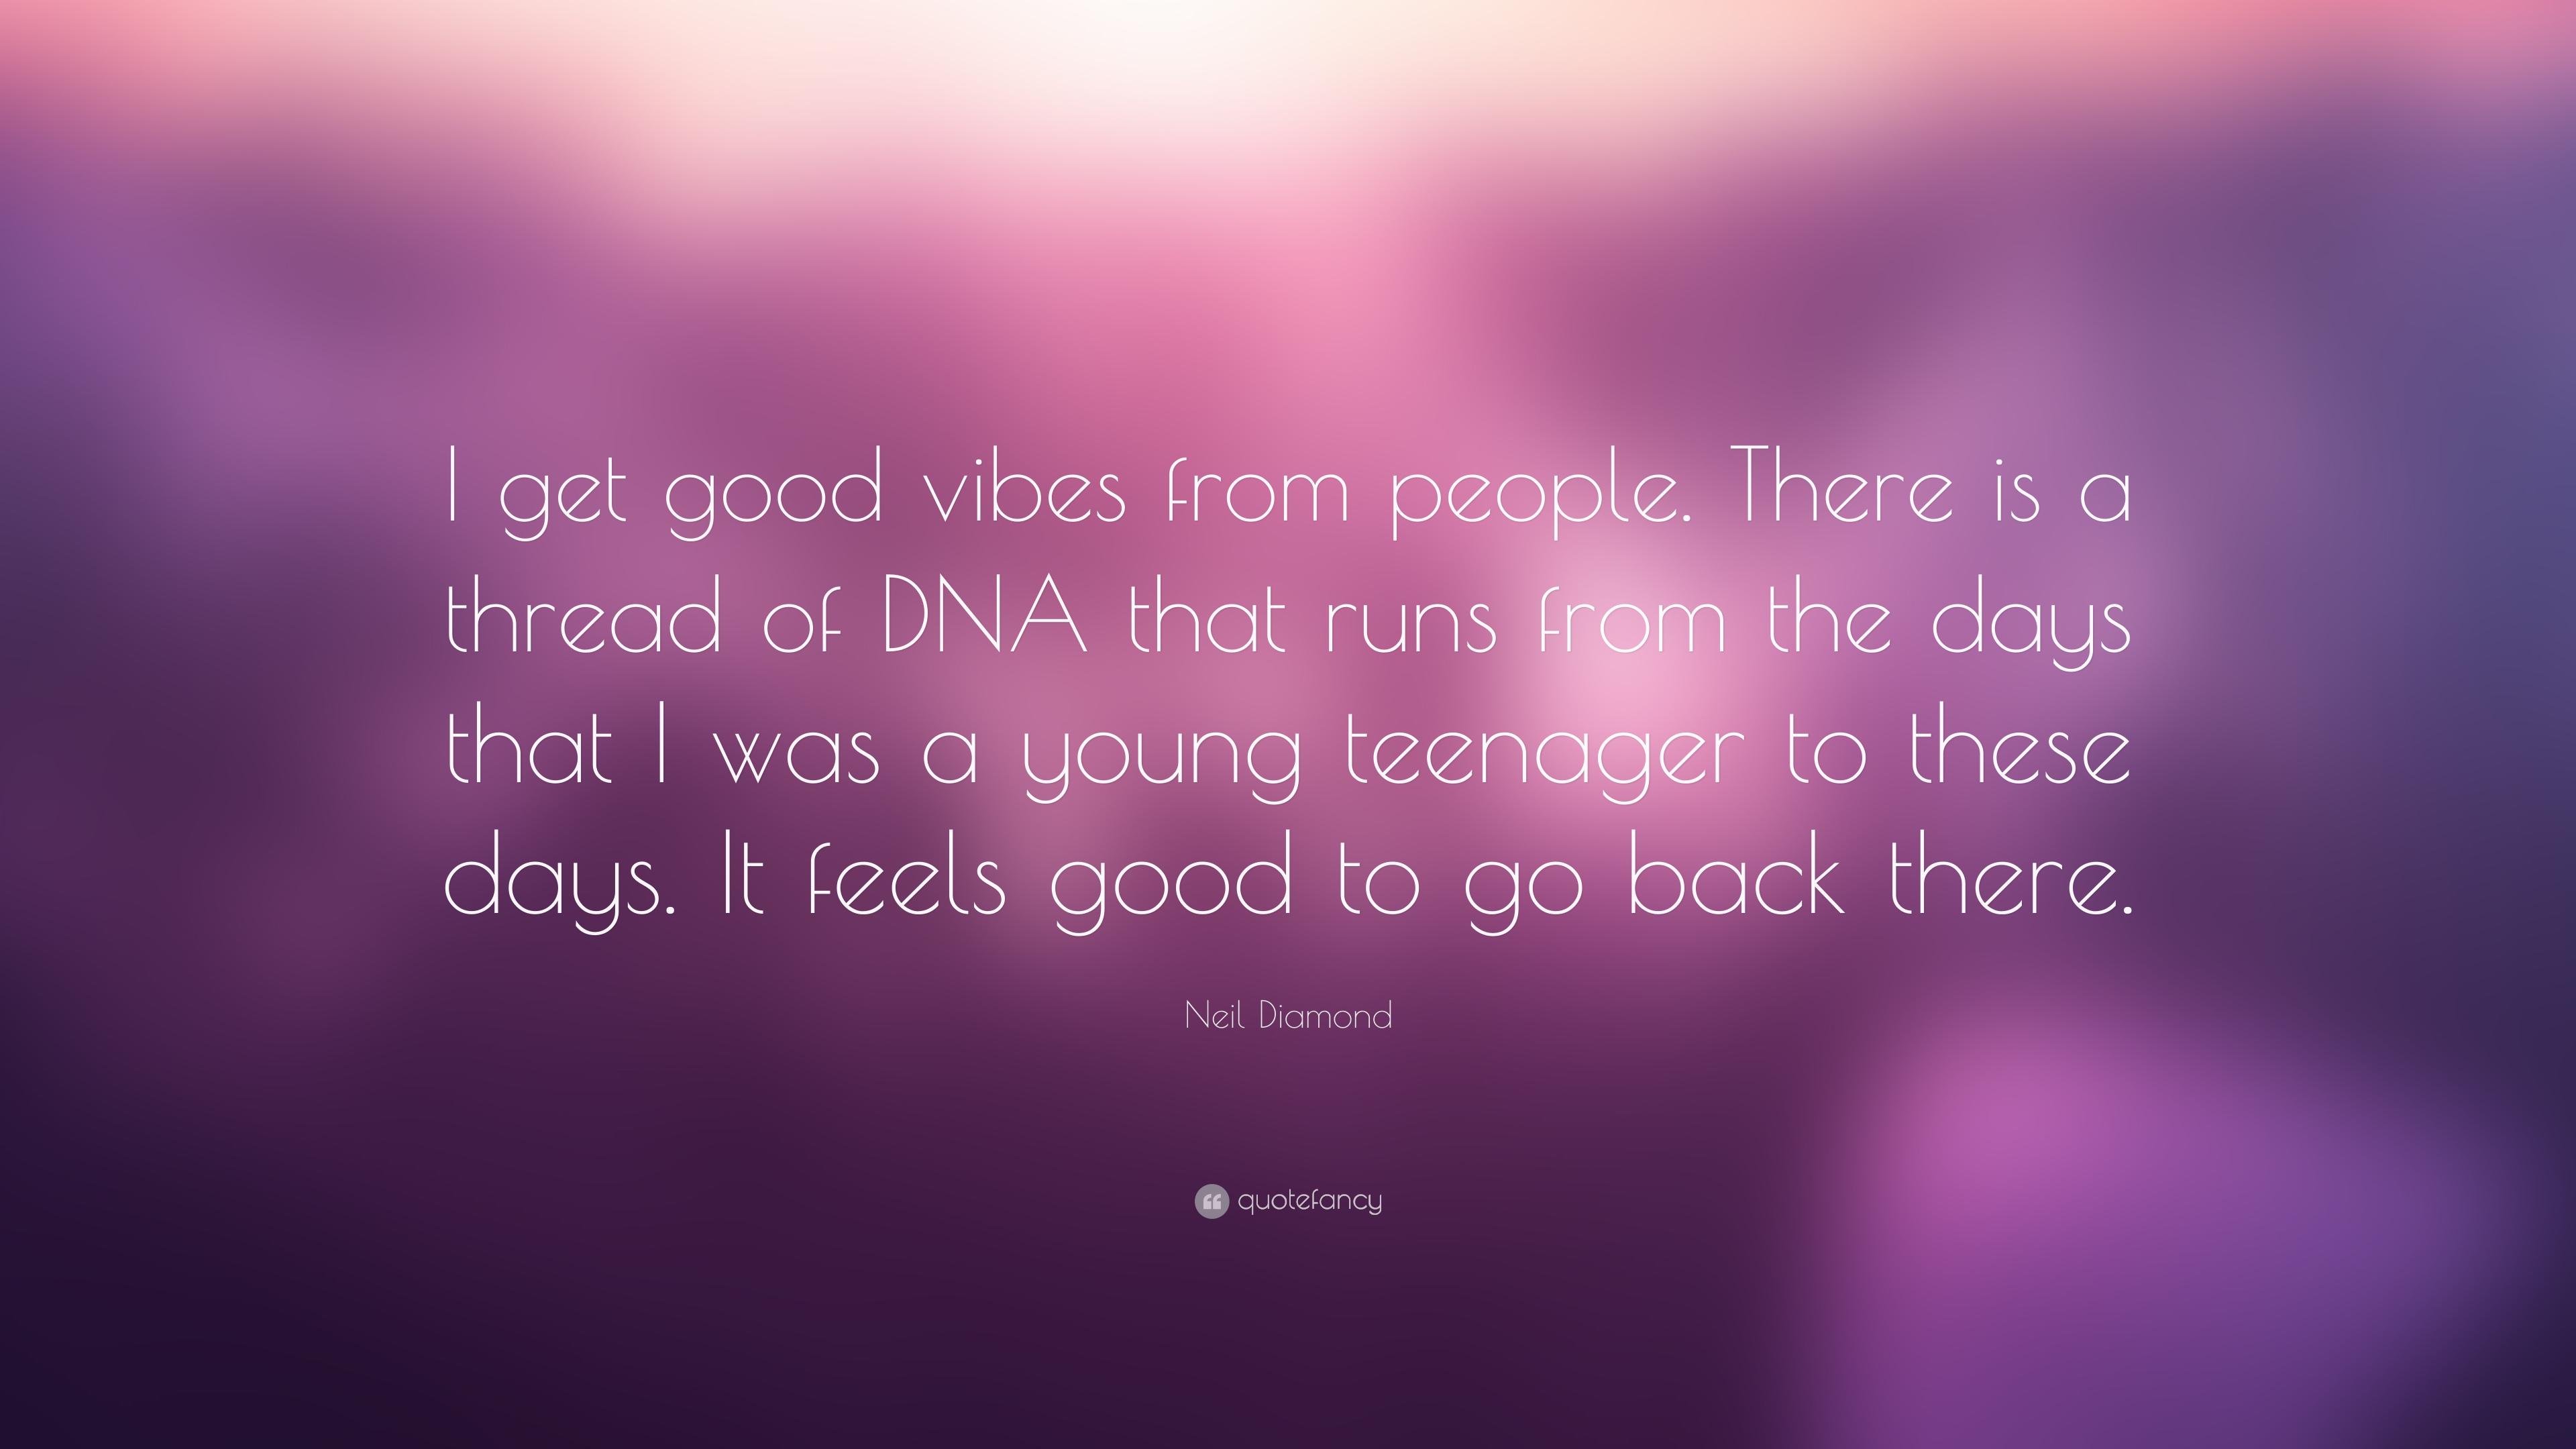 Neil Diamond Quote: “I get good vibes from people. There is a thread